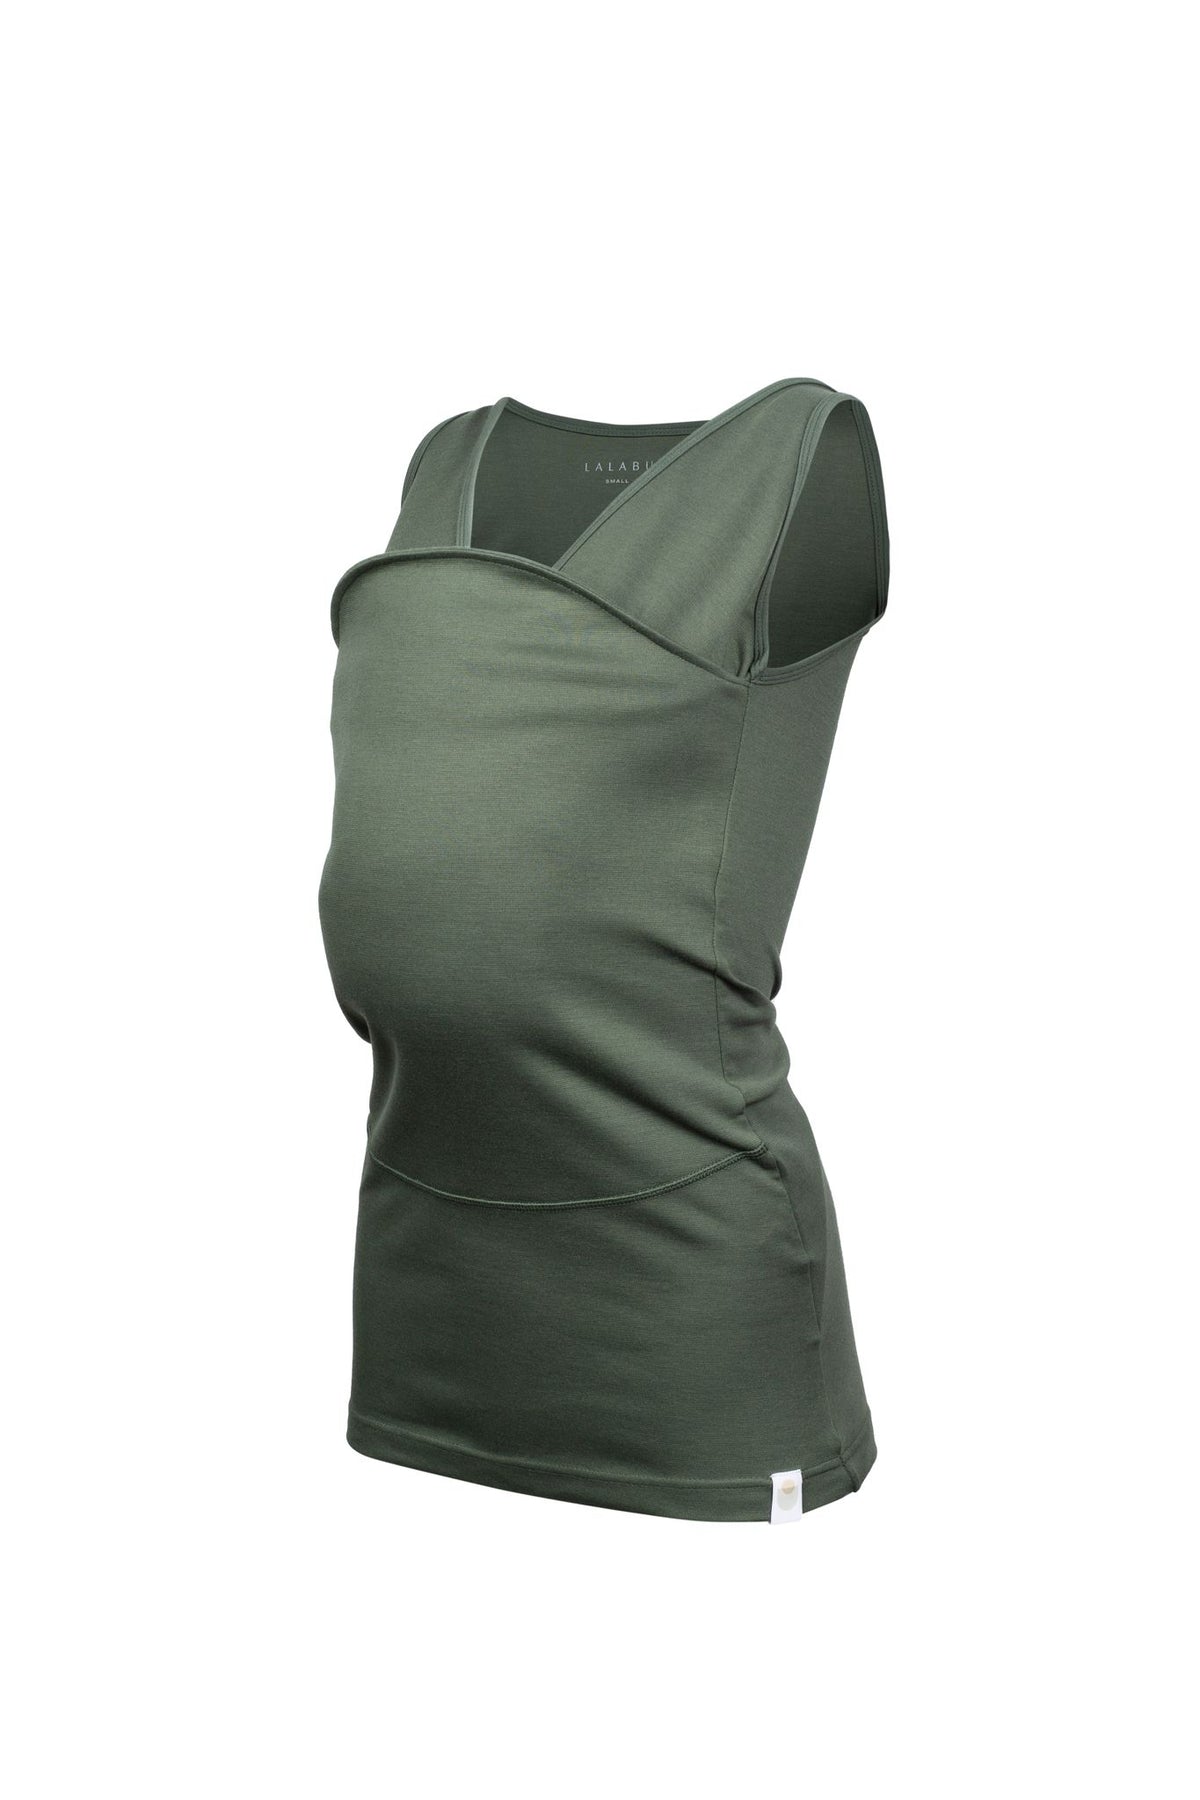 Tank top Soothe Shirt with a front pouch for wearing a newborn in green color called Fern.